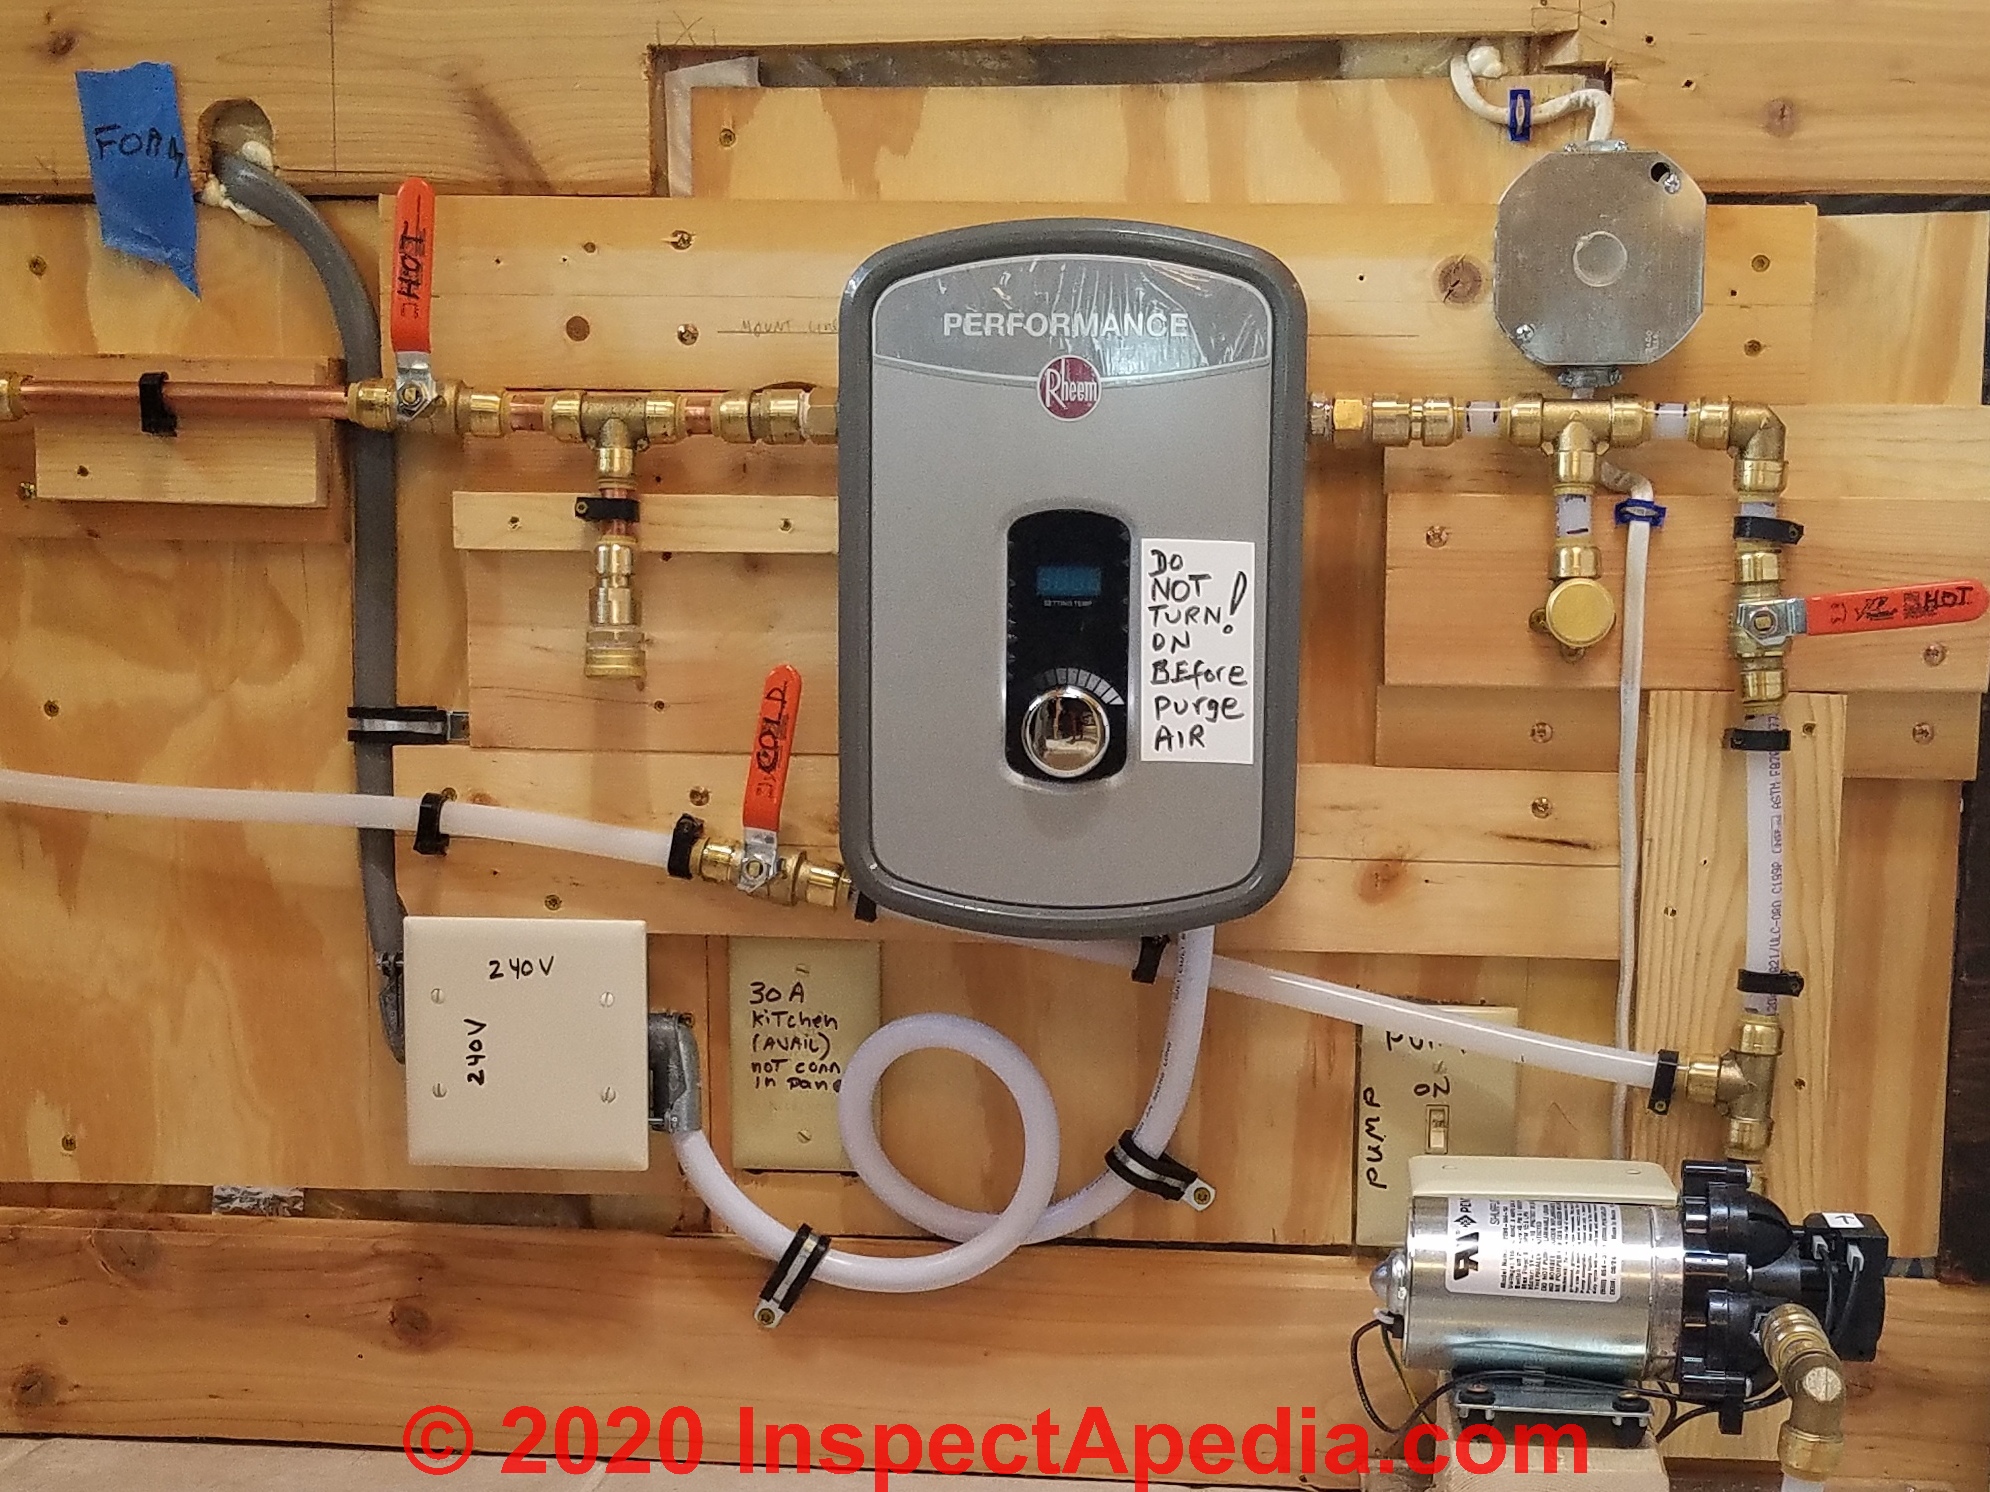 Is it worth the money to get a electric tankless water heater?